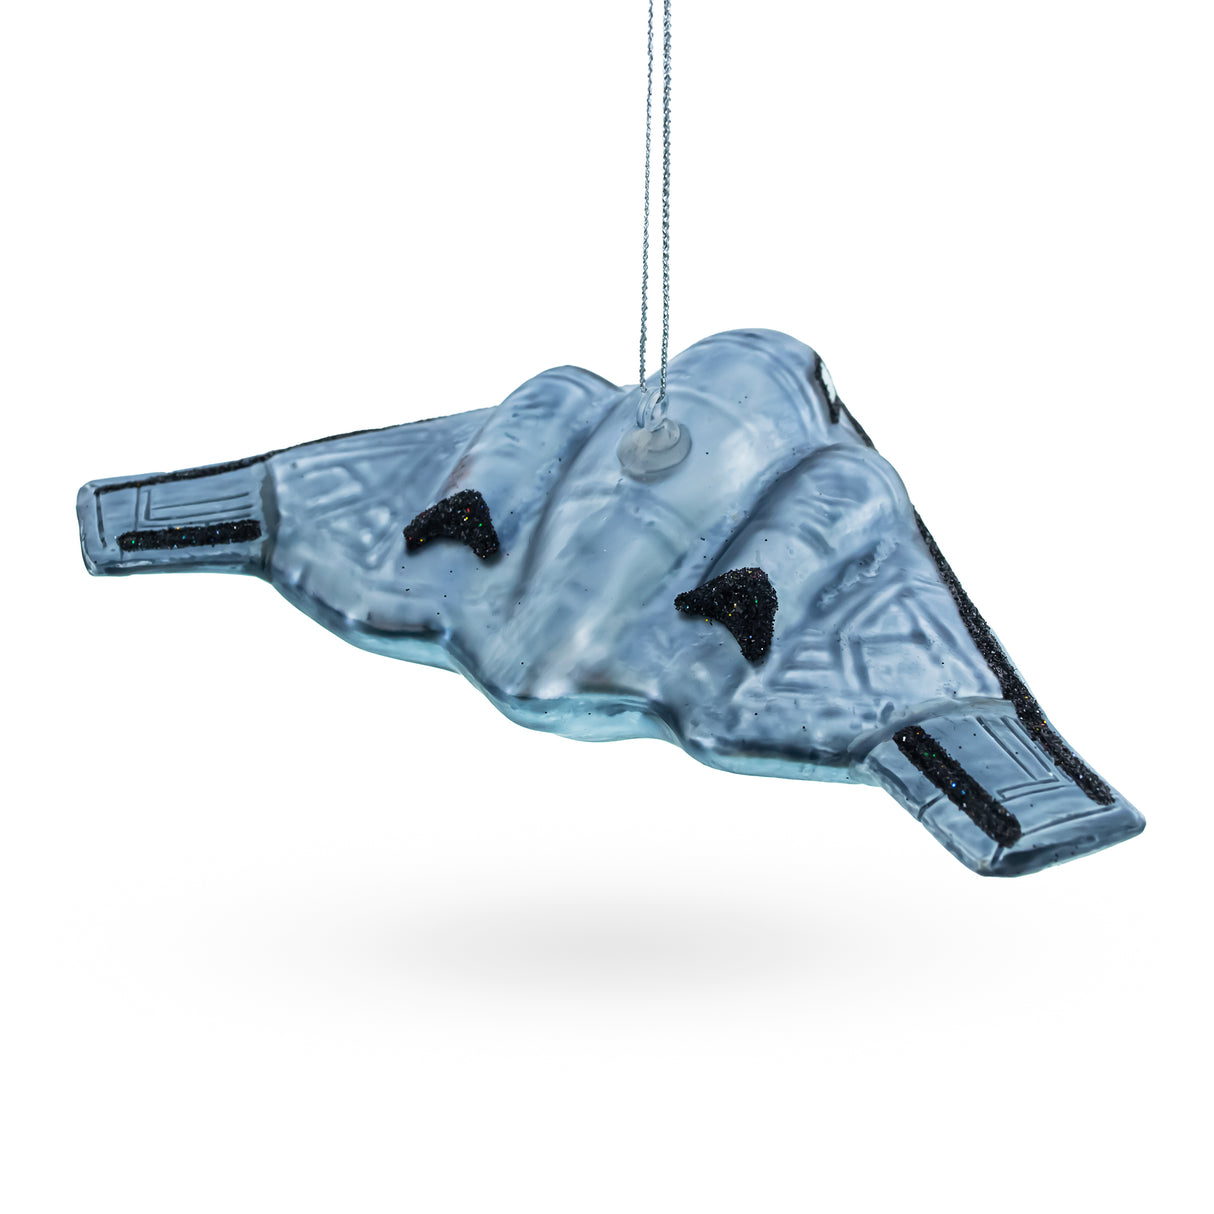 Sleek Stealth Bomber B-2 - Blown Glass Christmas Ornament ,dimensions in inches: 5.66 x 1.6 x 3.36